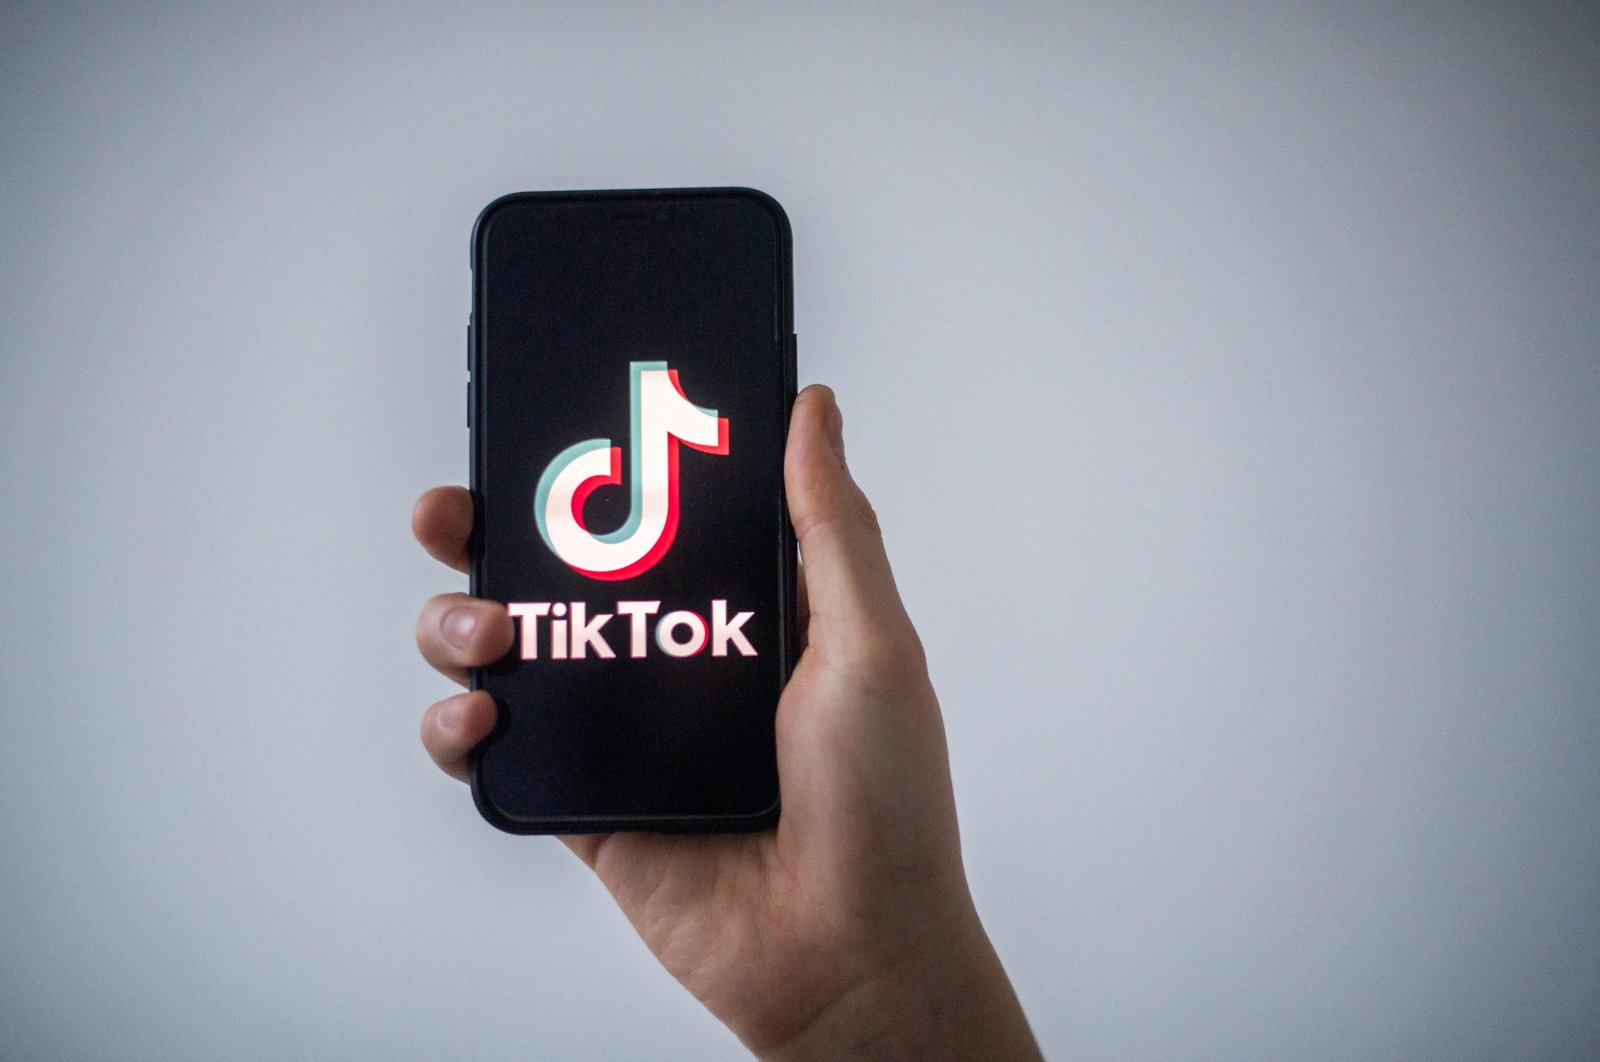 A man shows a smartphone with the logo of Chinese social network TikTok in this file illustration photo taken in Nantes, western France, Jan. 21, 2021. (AFP Photo)